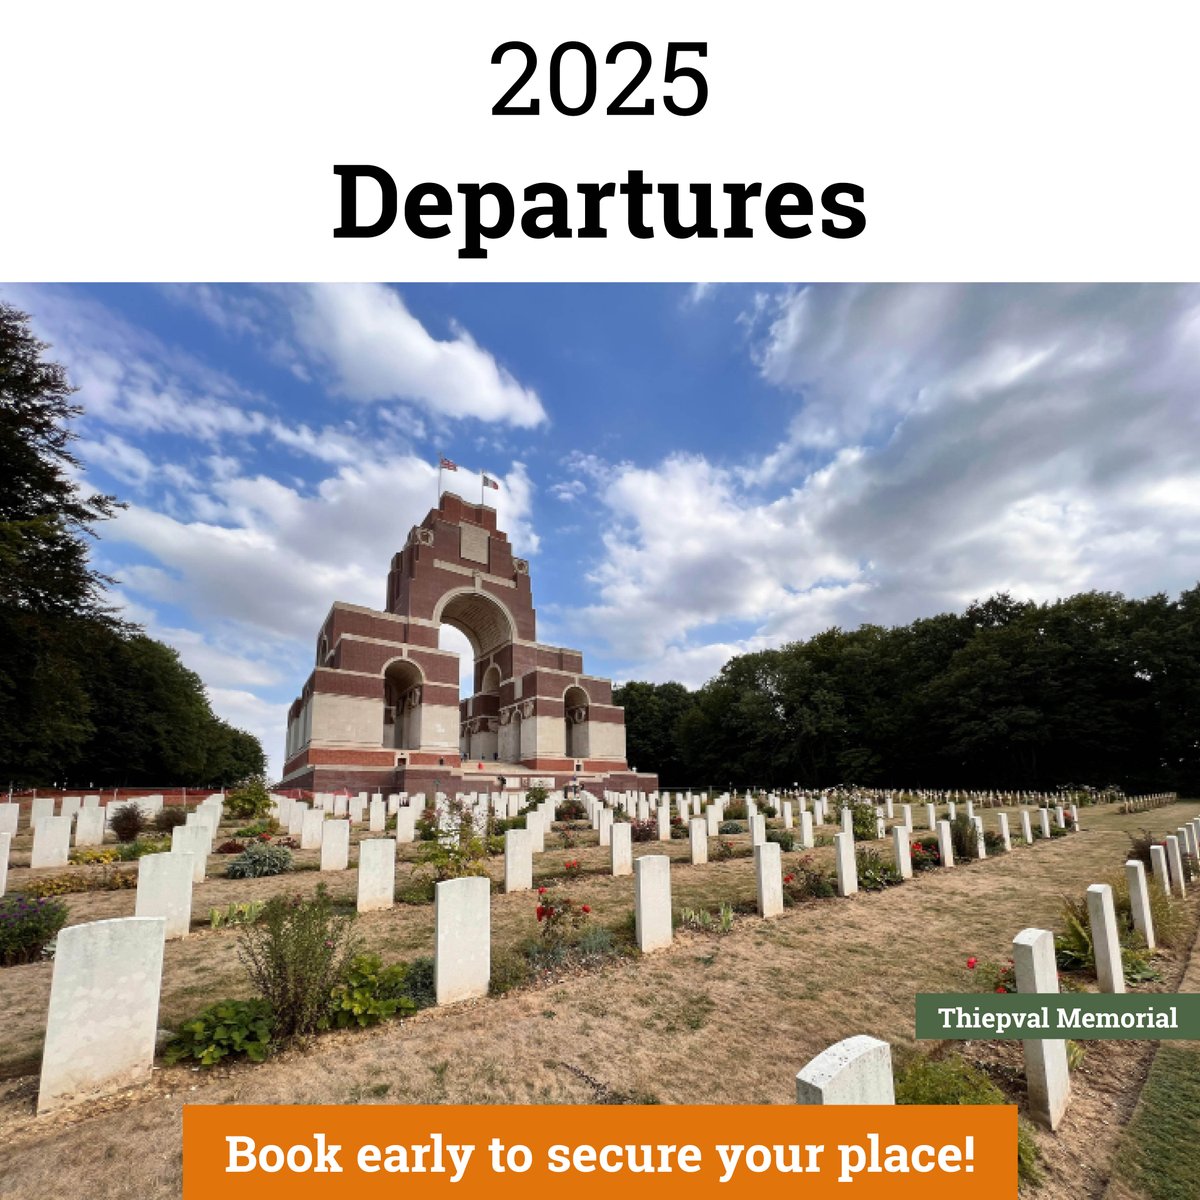 Thinking about taking a Battlefields tour in 2025? Book today and, with ‘Locked In Prices', your place is secured without having to worry about any possible increases. What’s more, with flexible payment options you can pay the way that suits you best. >> ow.ly/btG850R6Cre